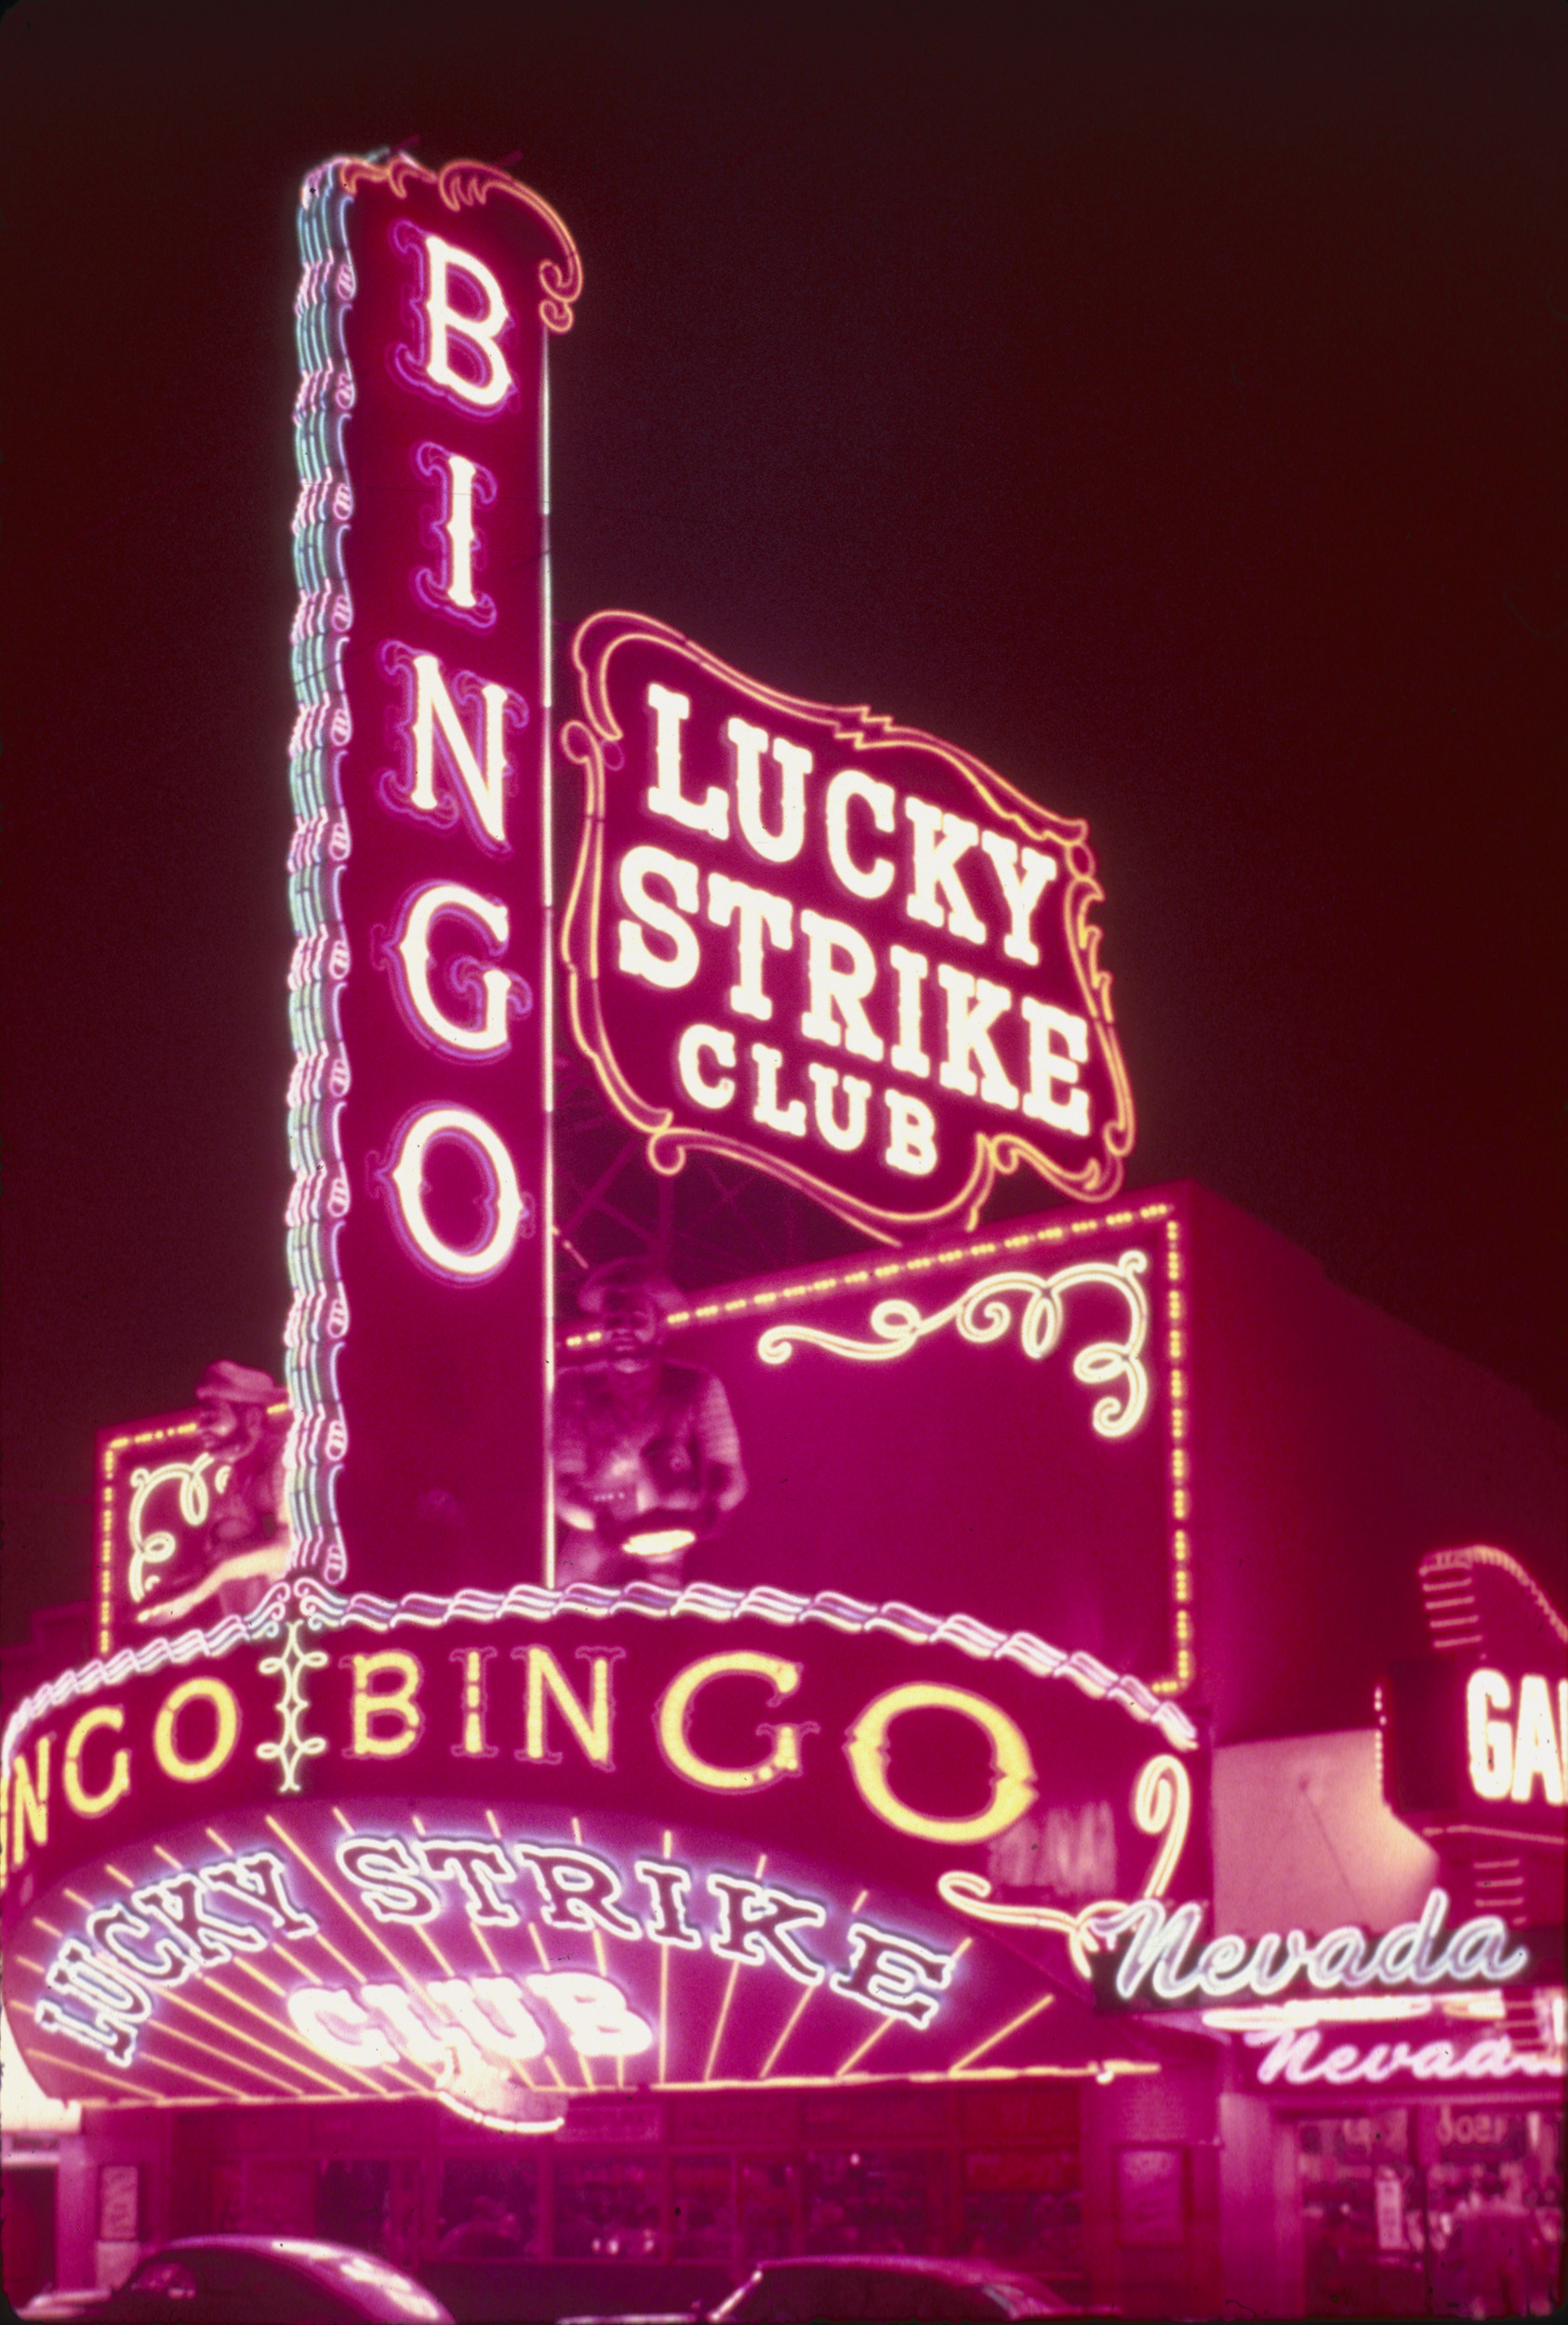 Slide of the neon signs for the Lucky Strike Club, Las Vegas, circa 1950s